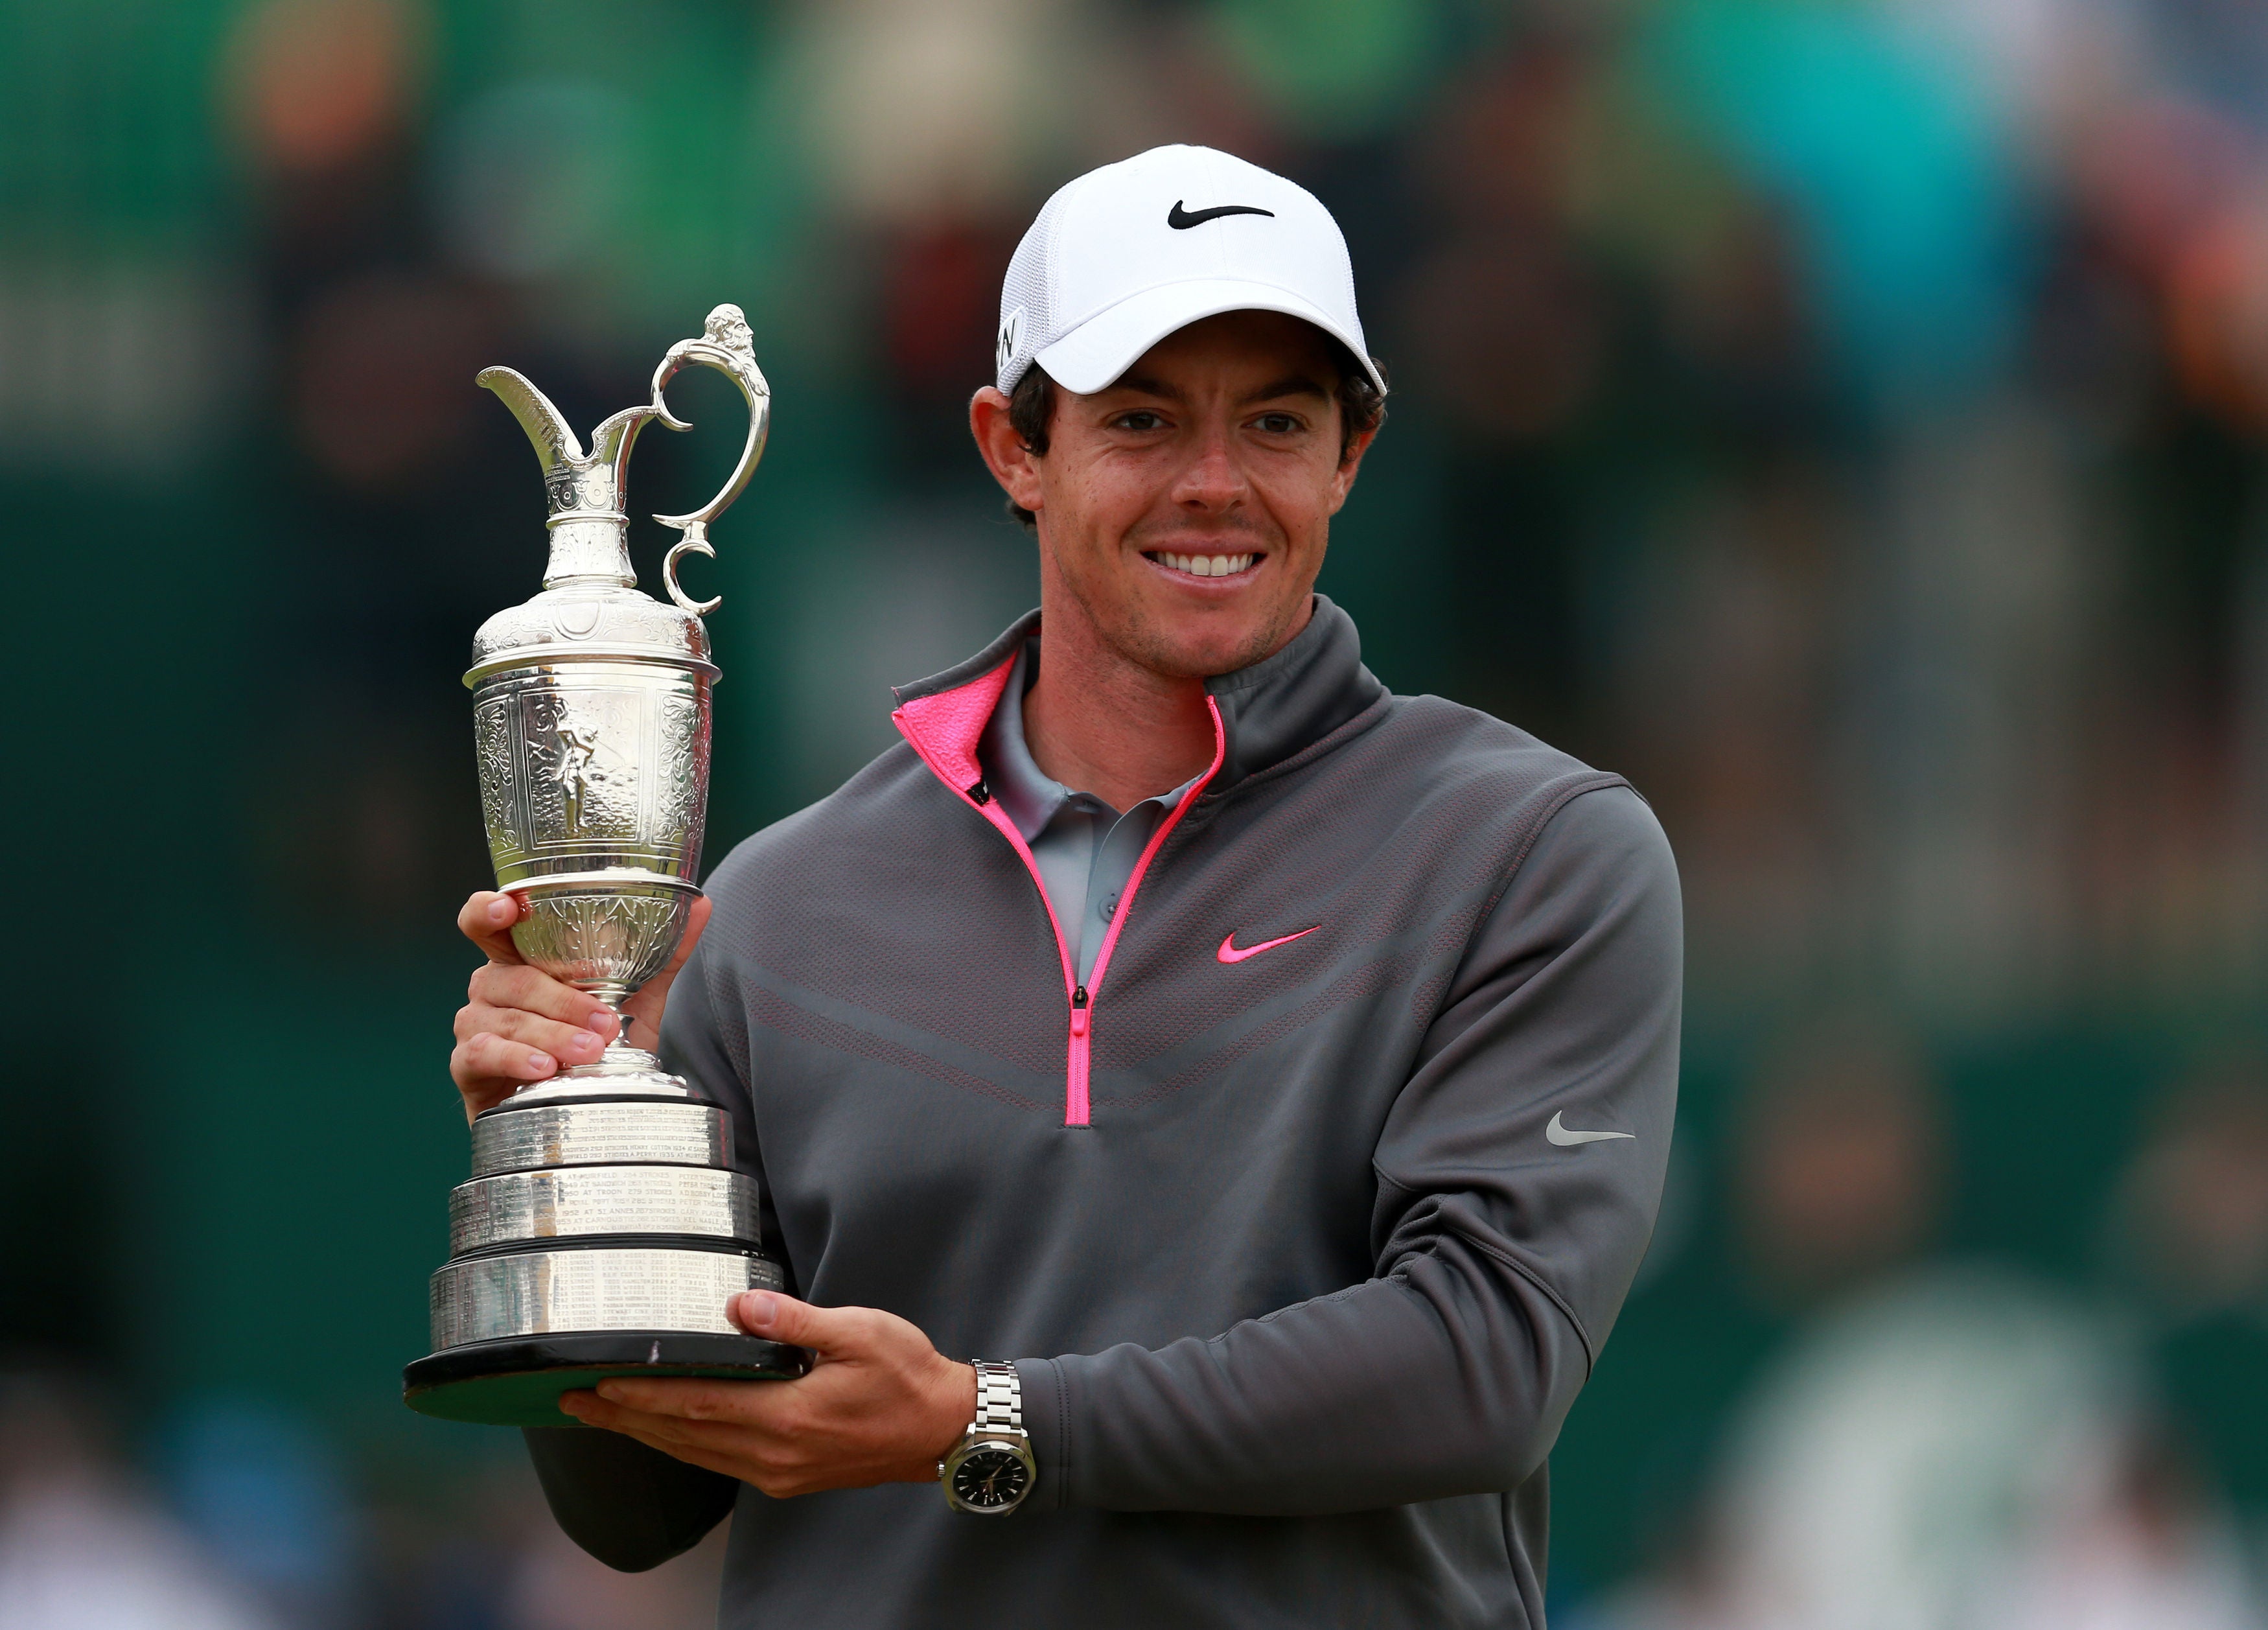 Rory McIlroy celebrates with the Claret Jug after winning the 2014 Open Championship at Royal Liverpool (David Davies/PA)